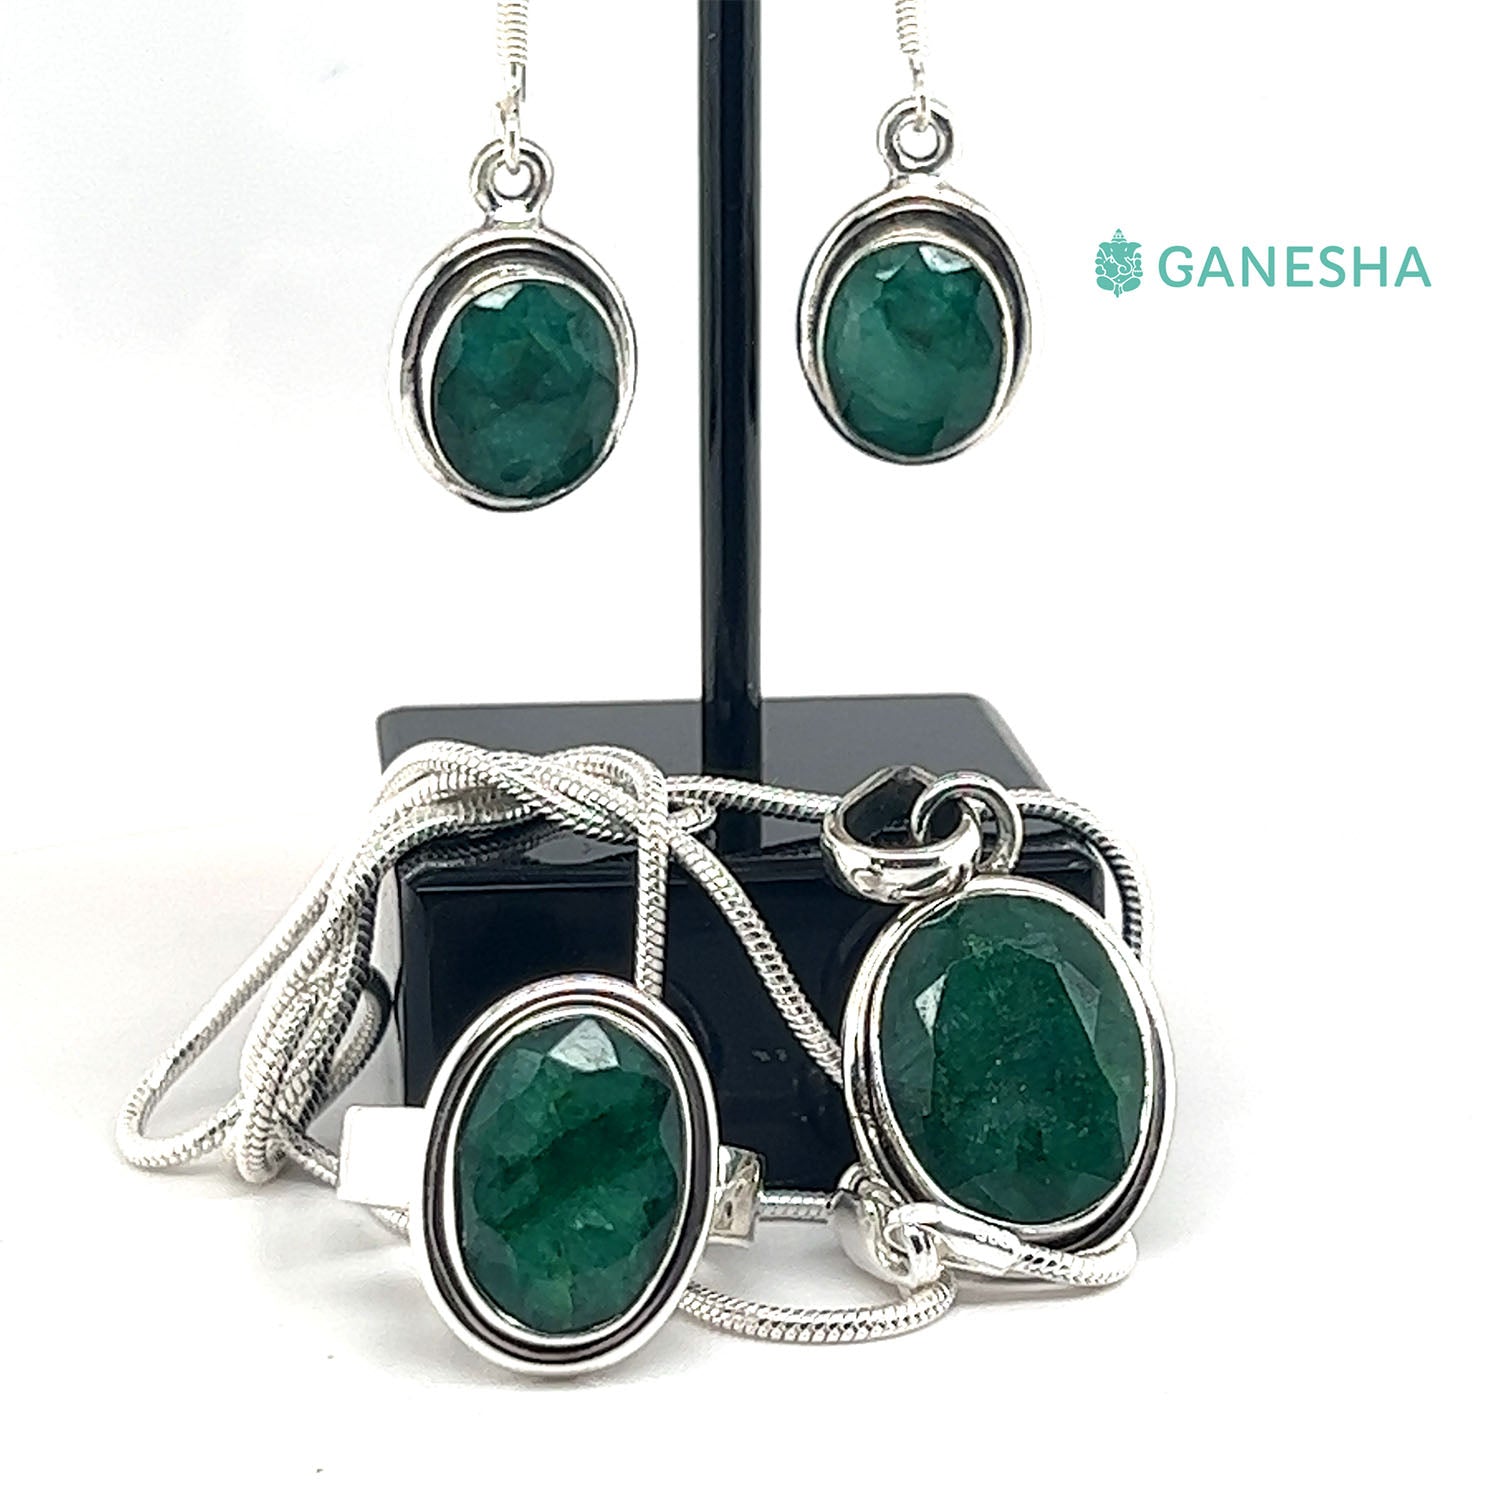 Ganesha Handicrafts, Emerald - 925 Sterling Silver Jewellery Gift Set With Free Chain, 925 Sterling Silver Jewellery Gift Set With Free Chain, Womens stylized Jewellery and  Chain, Green Colour Emerald Silver Jewellery.